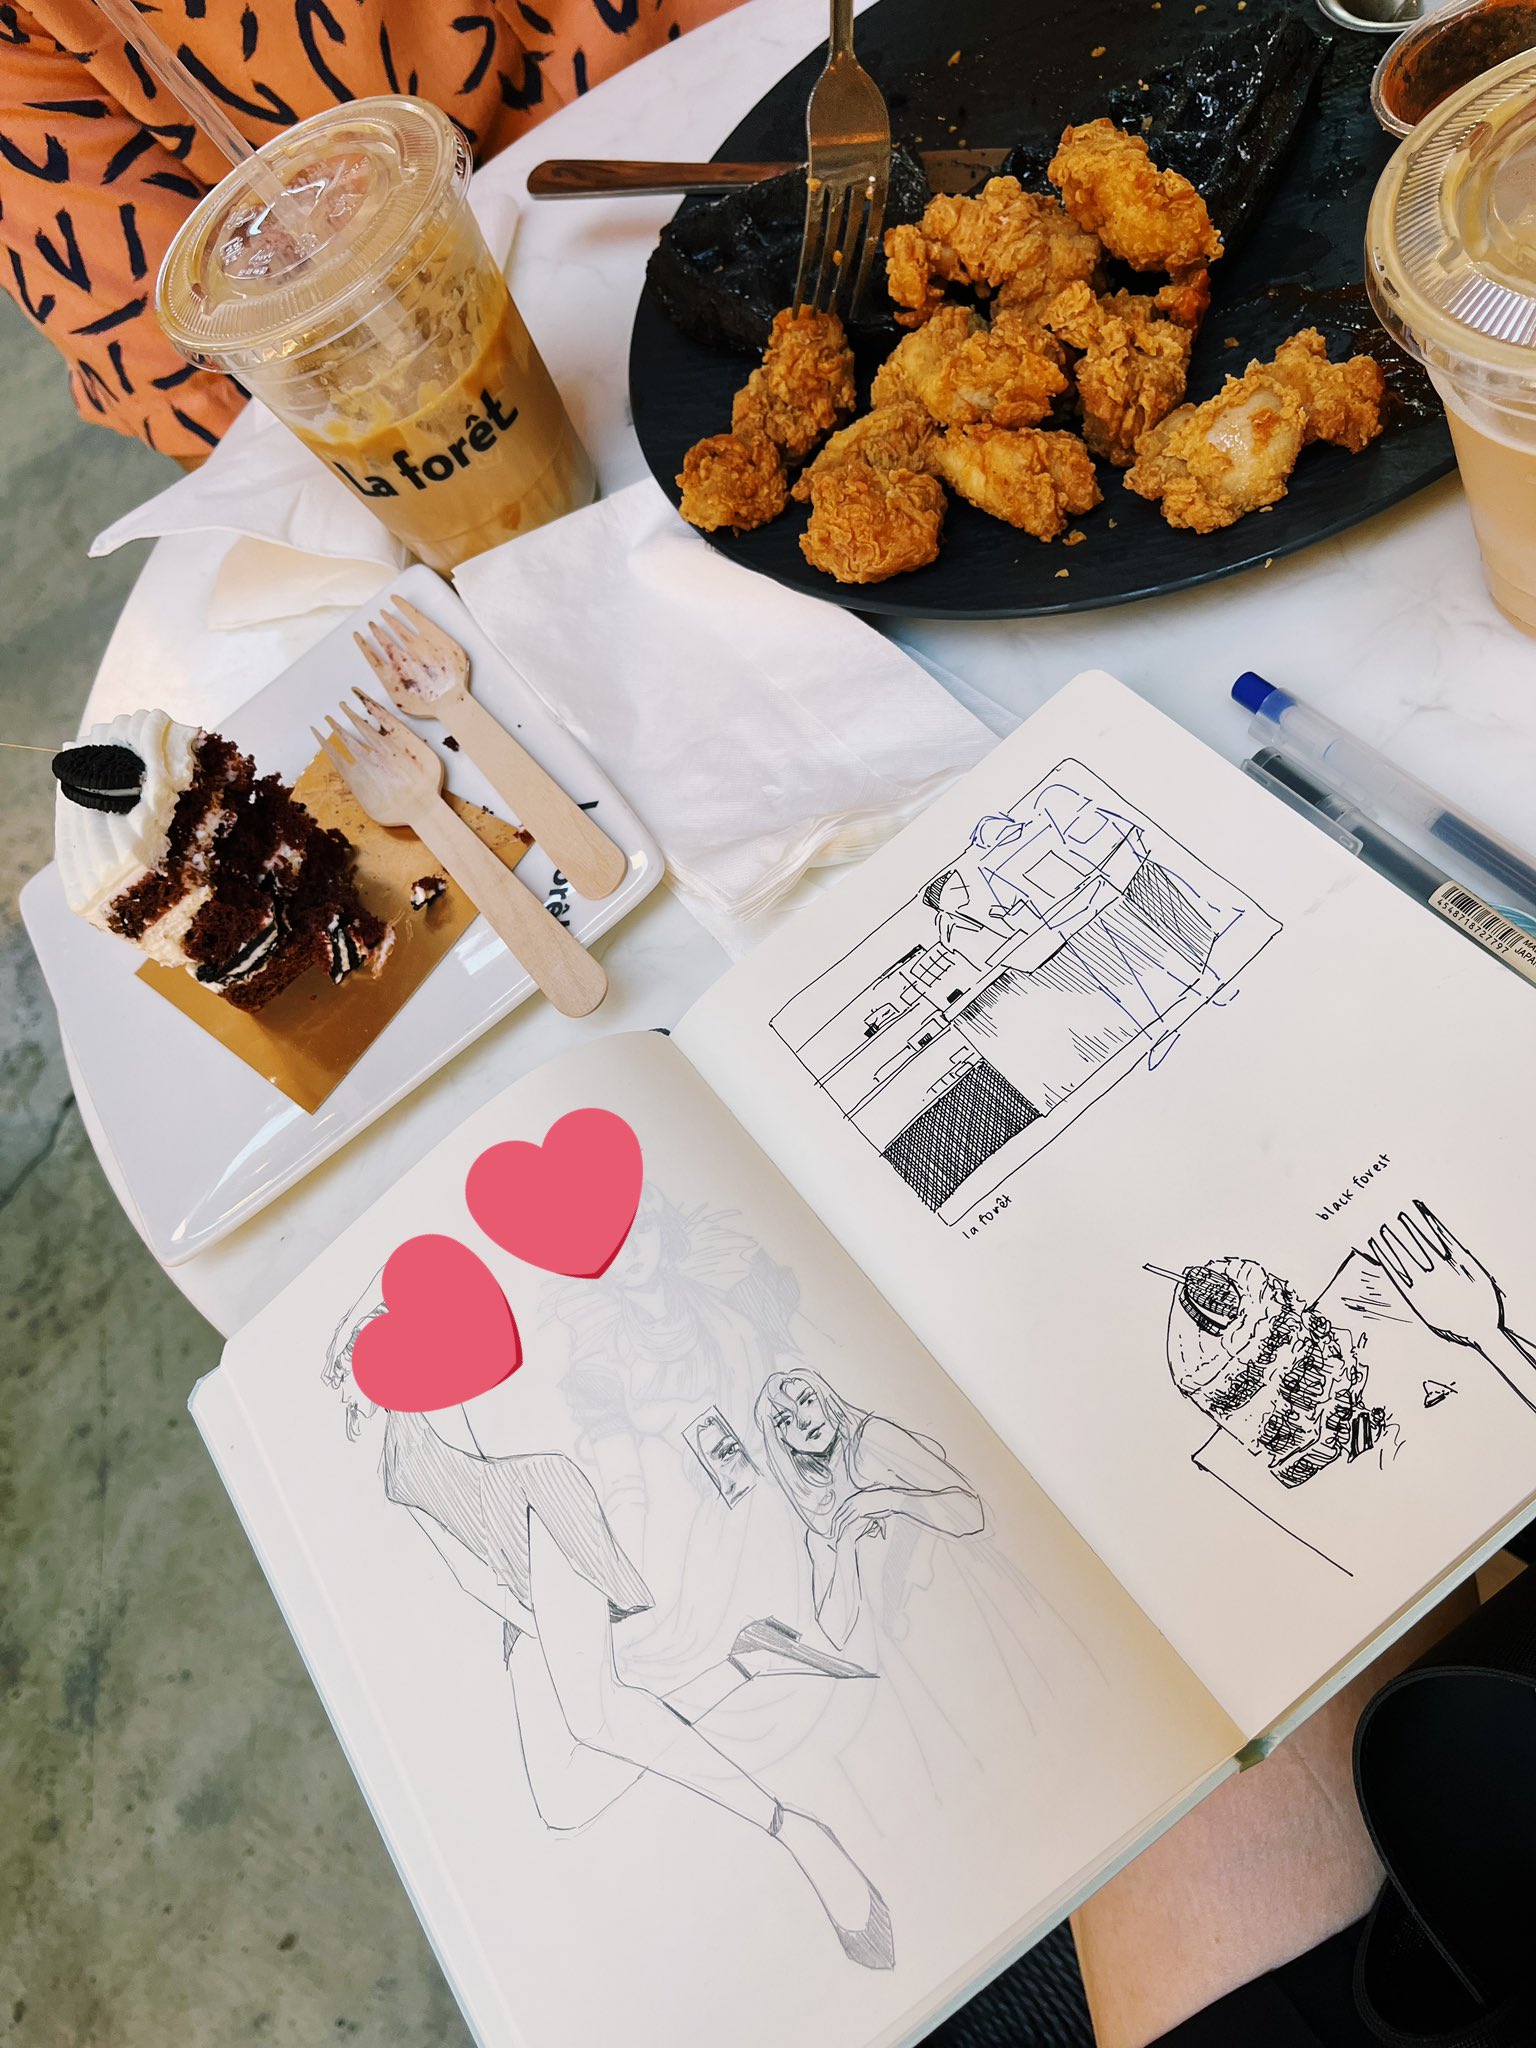 Sketchbook, cake, drinks, and fried chicken on a table. A heart emoji censors part of the sketchbook.